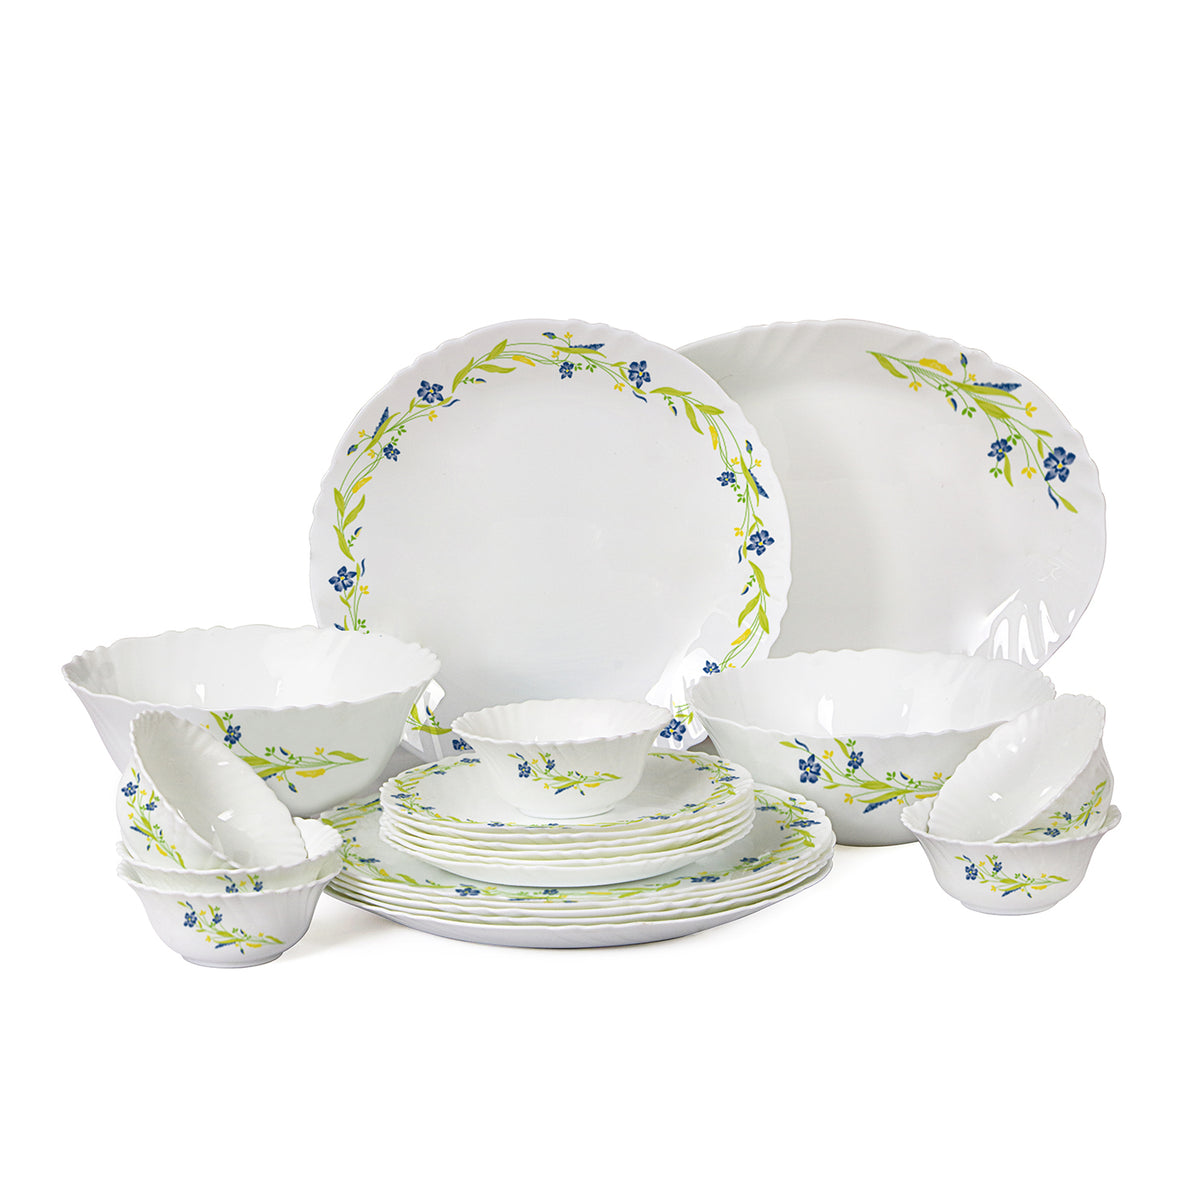 Imperial Series 21 Pieces Opalware Dinner Set for Family of 6 Amazon Creeper